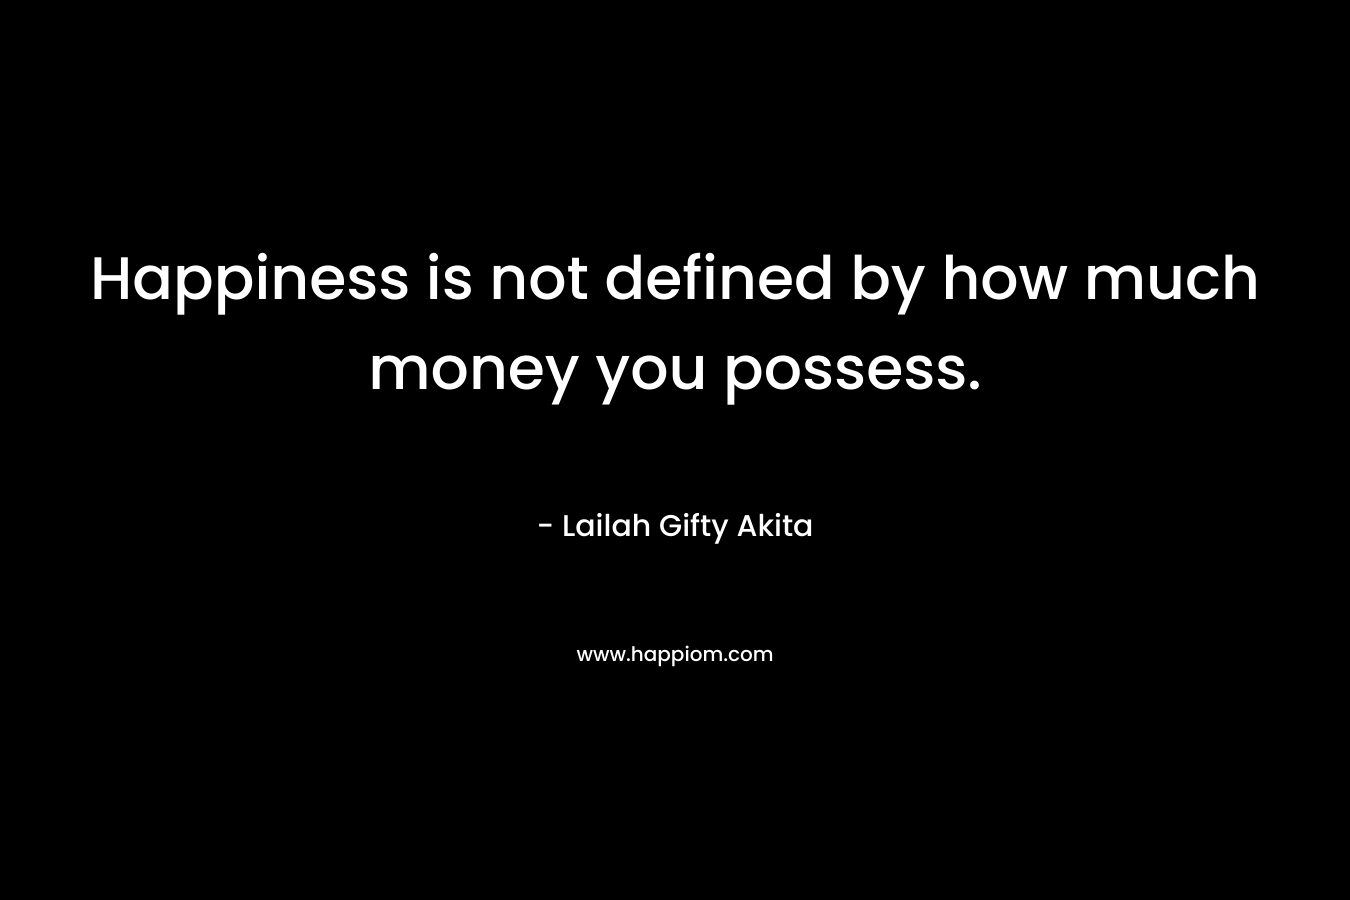 Happiness is not defined by how much money you possess.